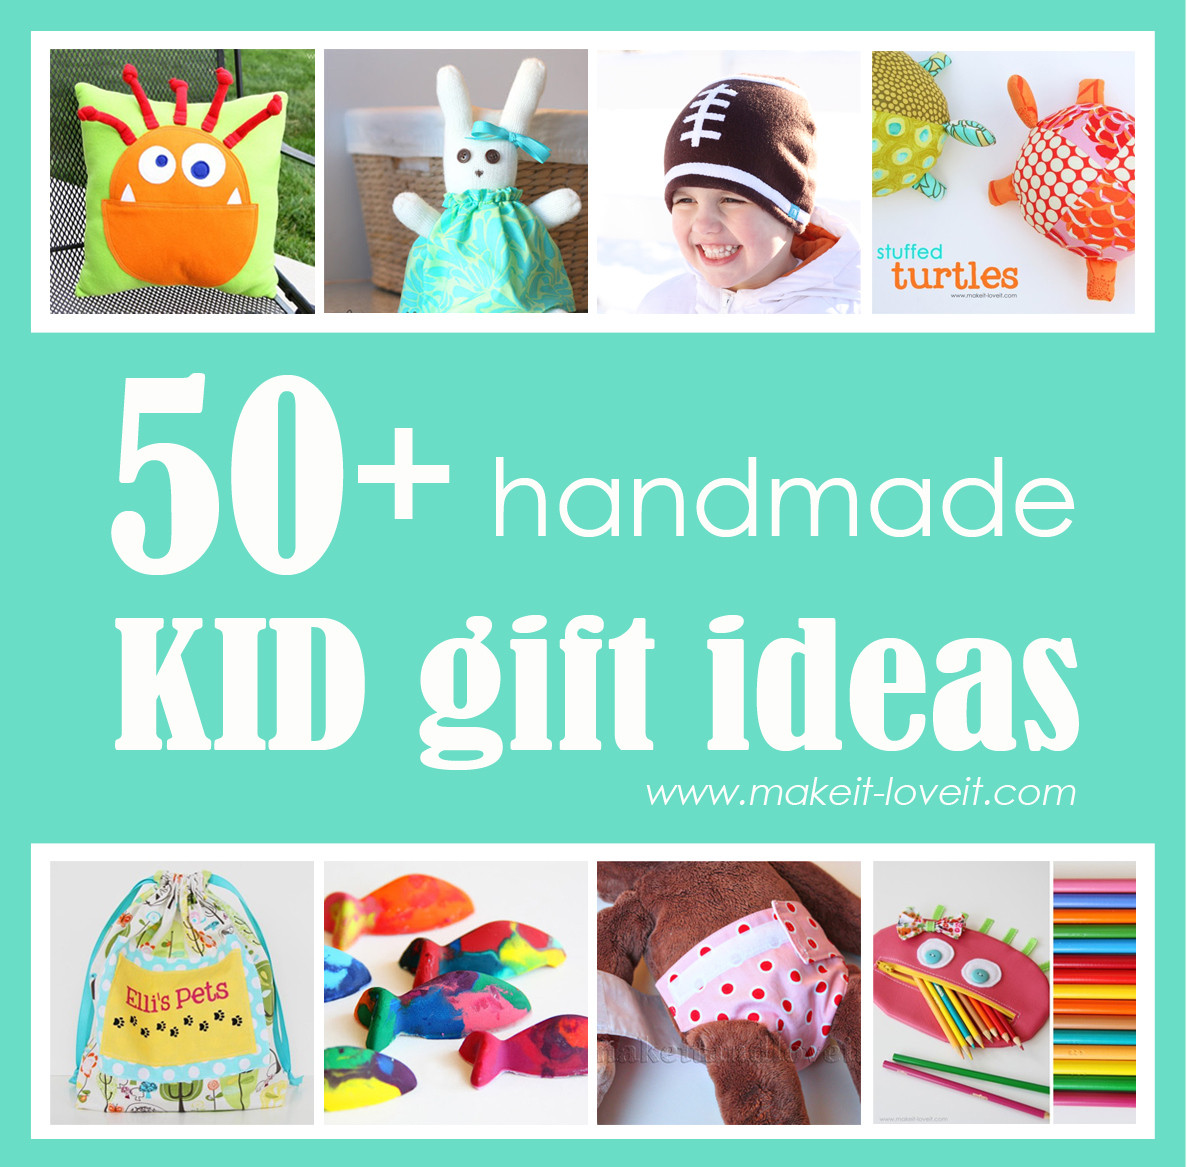 20 Ideas for Diy Birthday Gifts for Kids  Home, Family, Style and Art